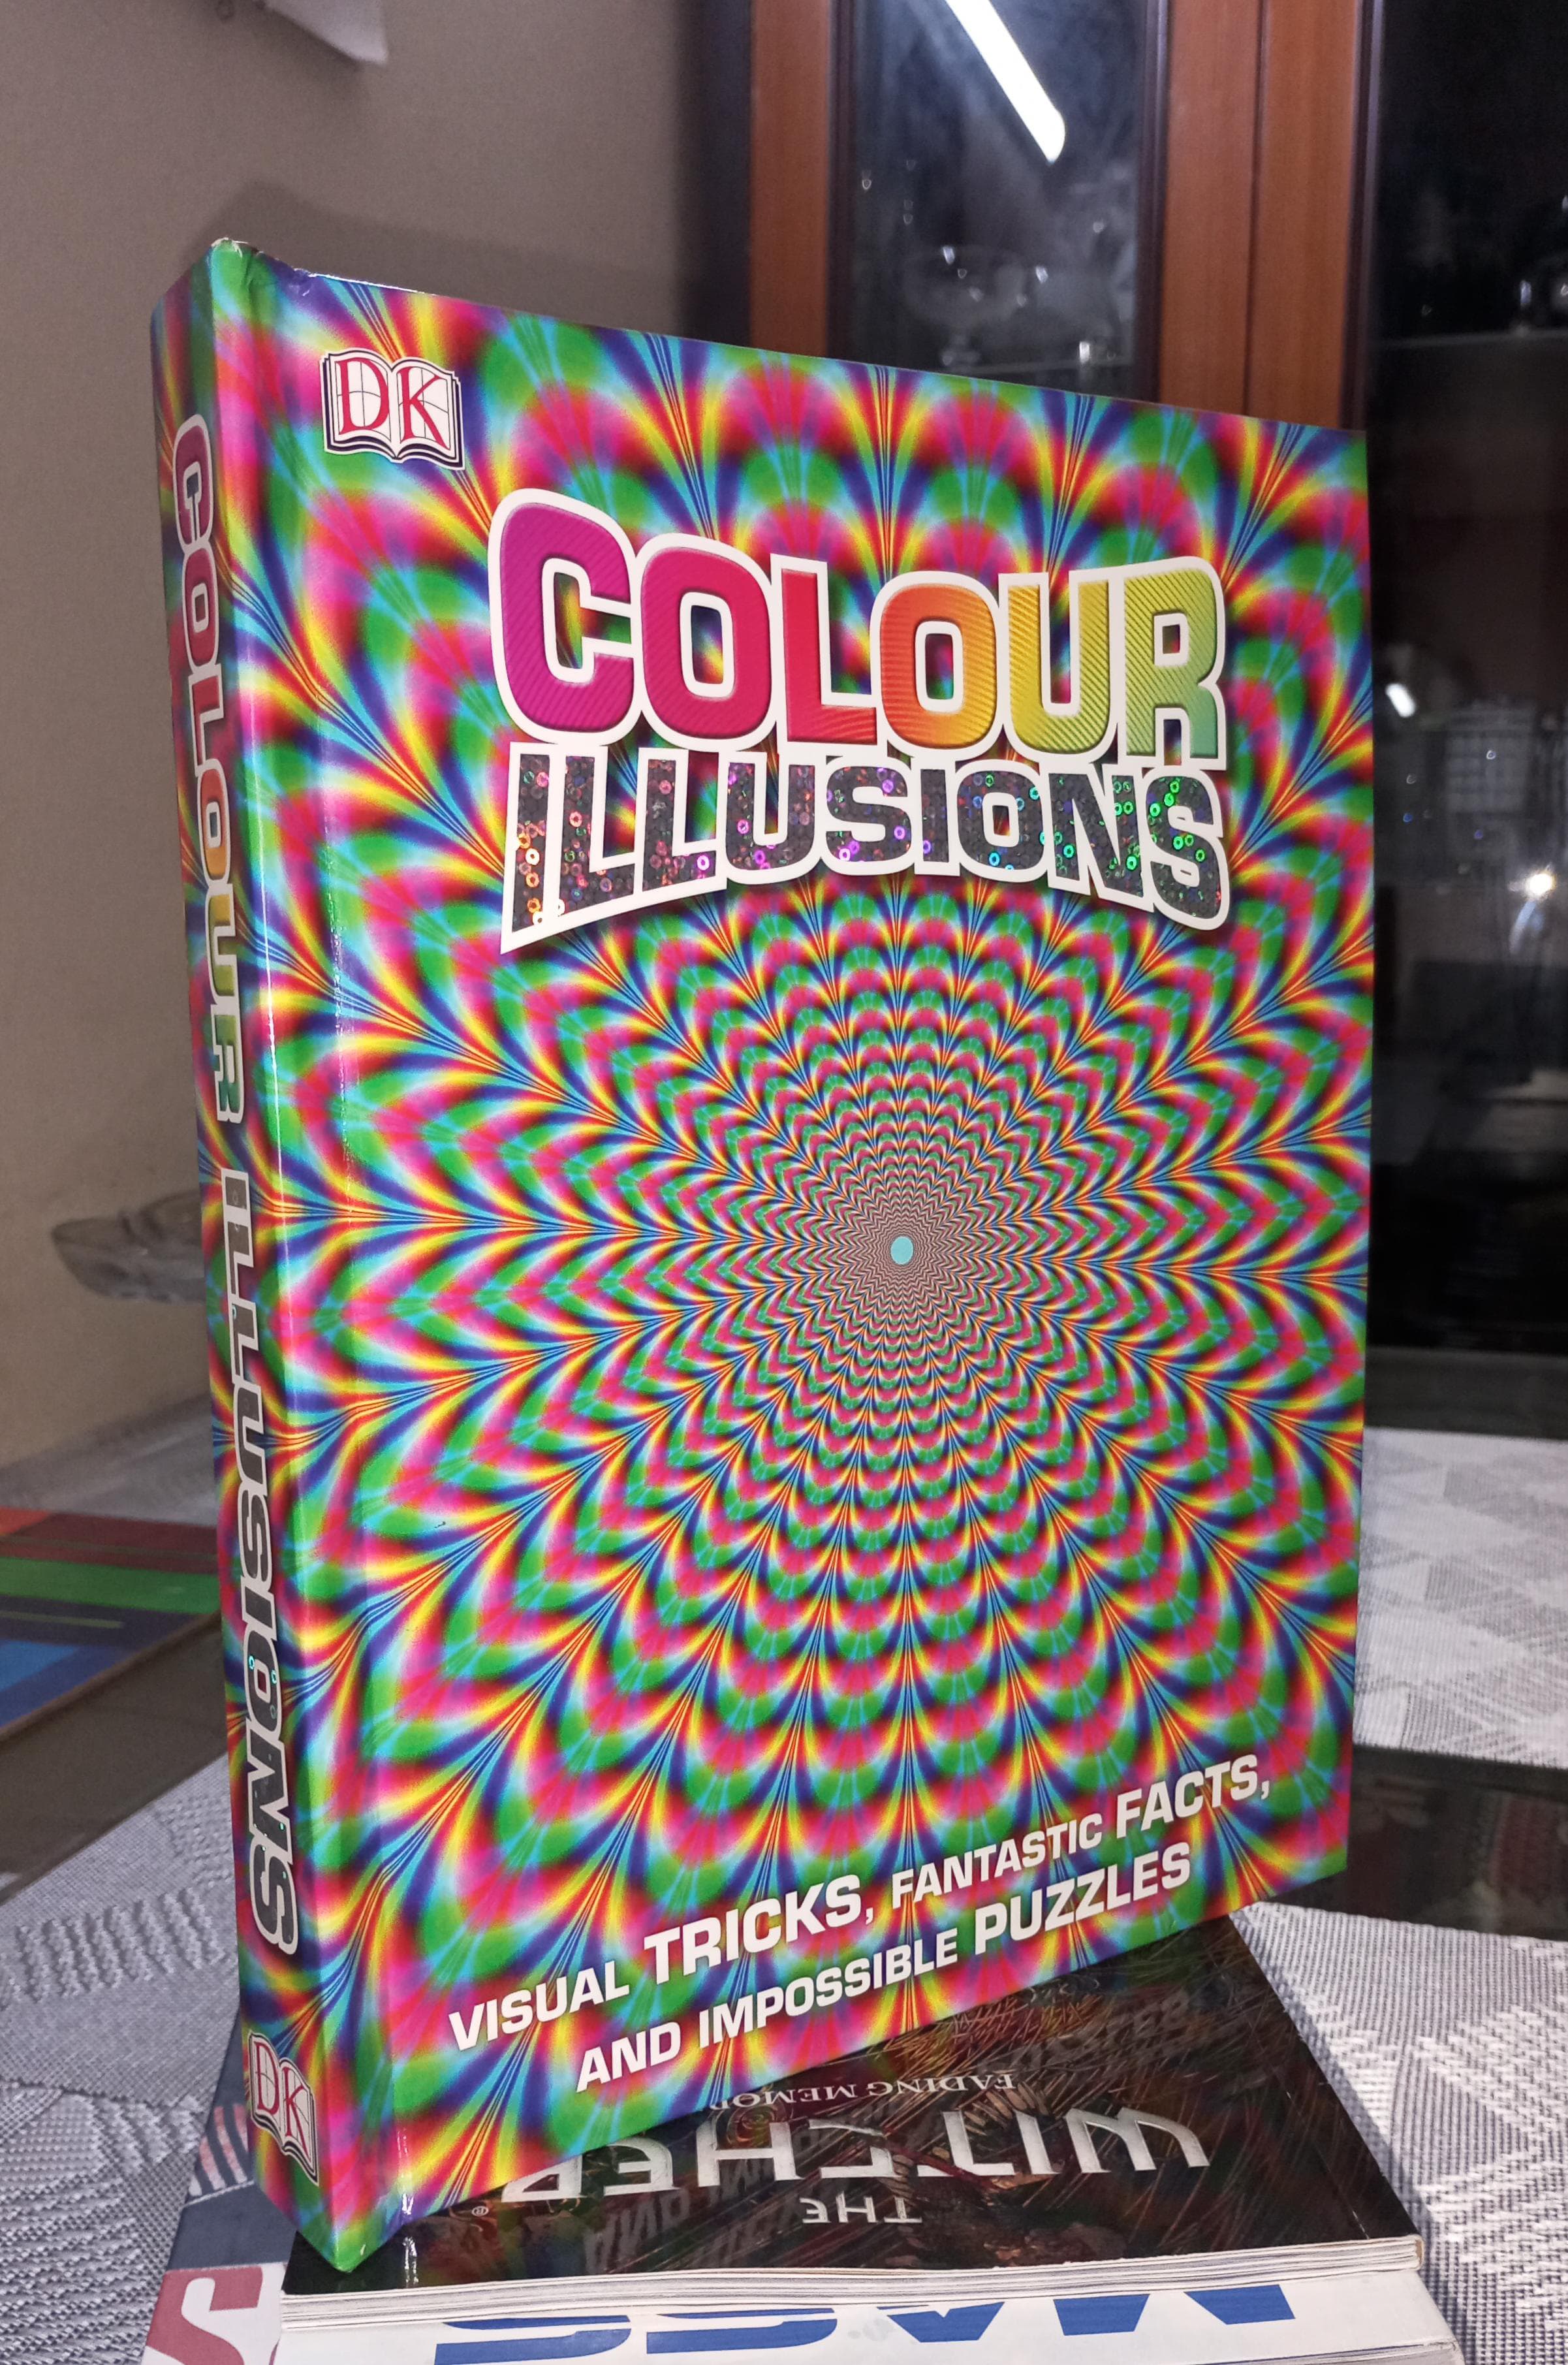 dk colour illusions visual tricks, fantastic facts, and impossible puzzles. new original large size